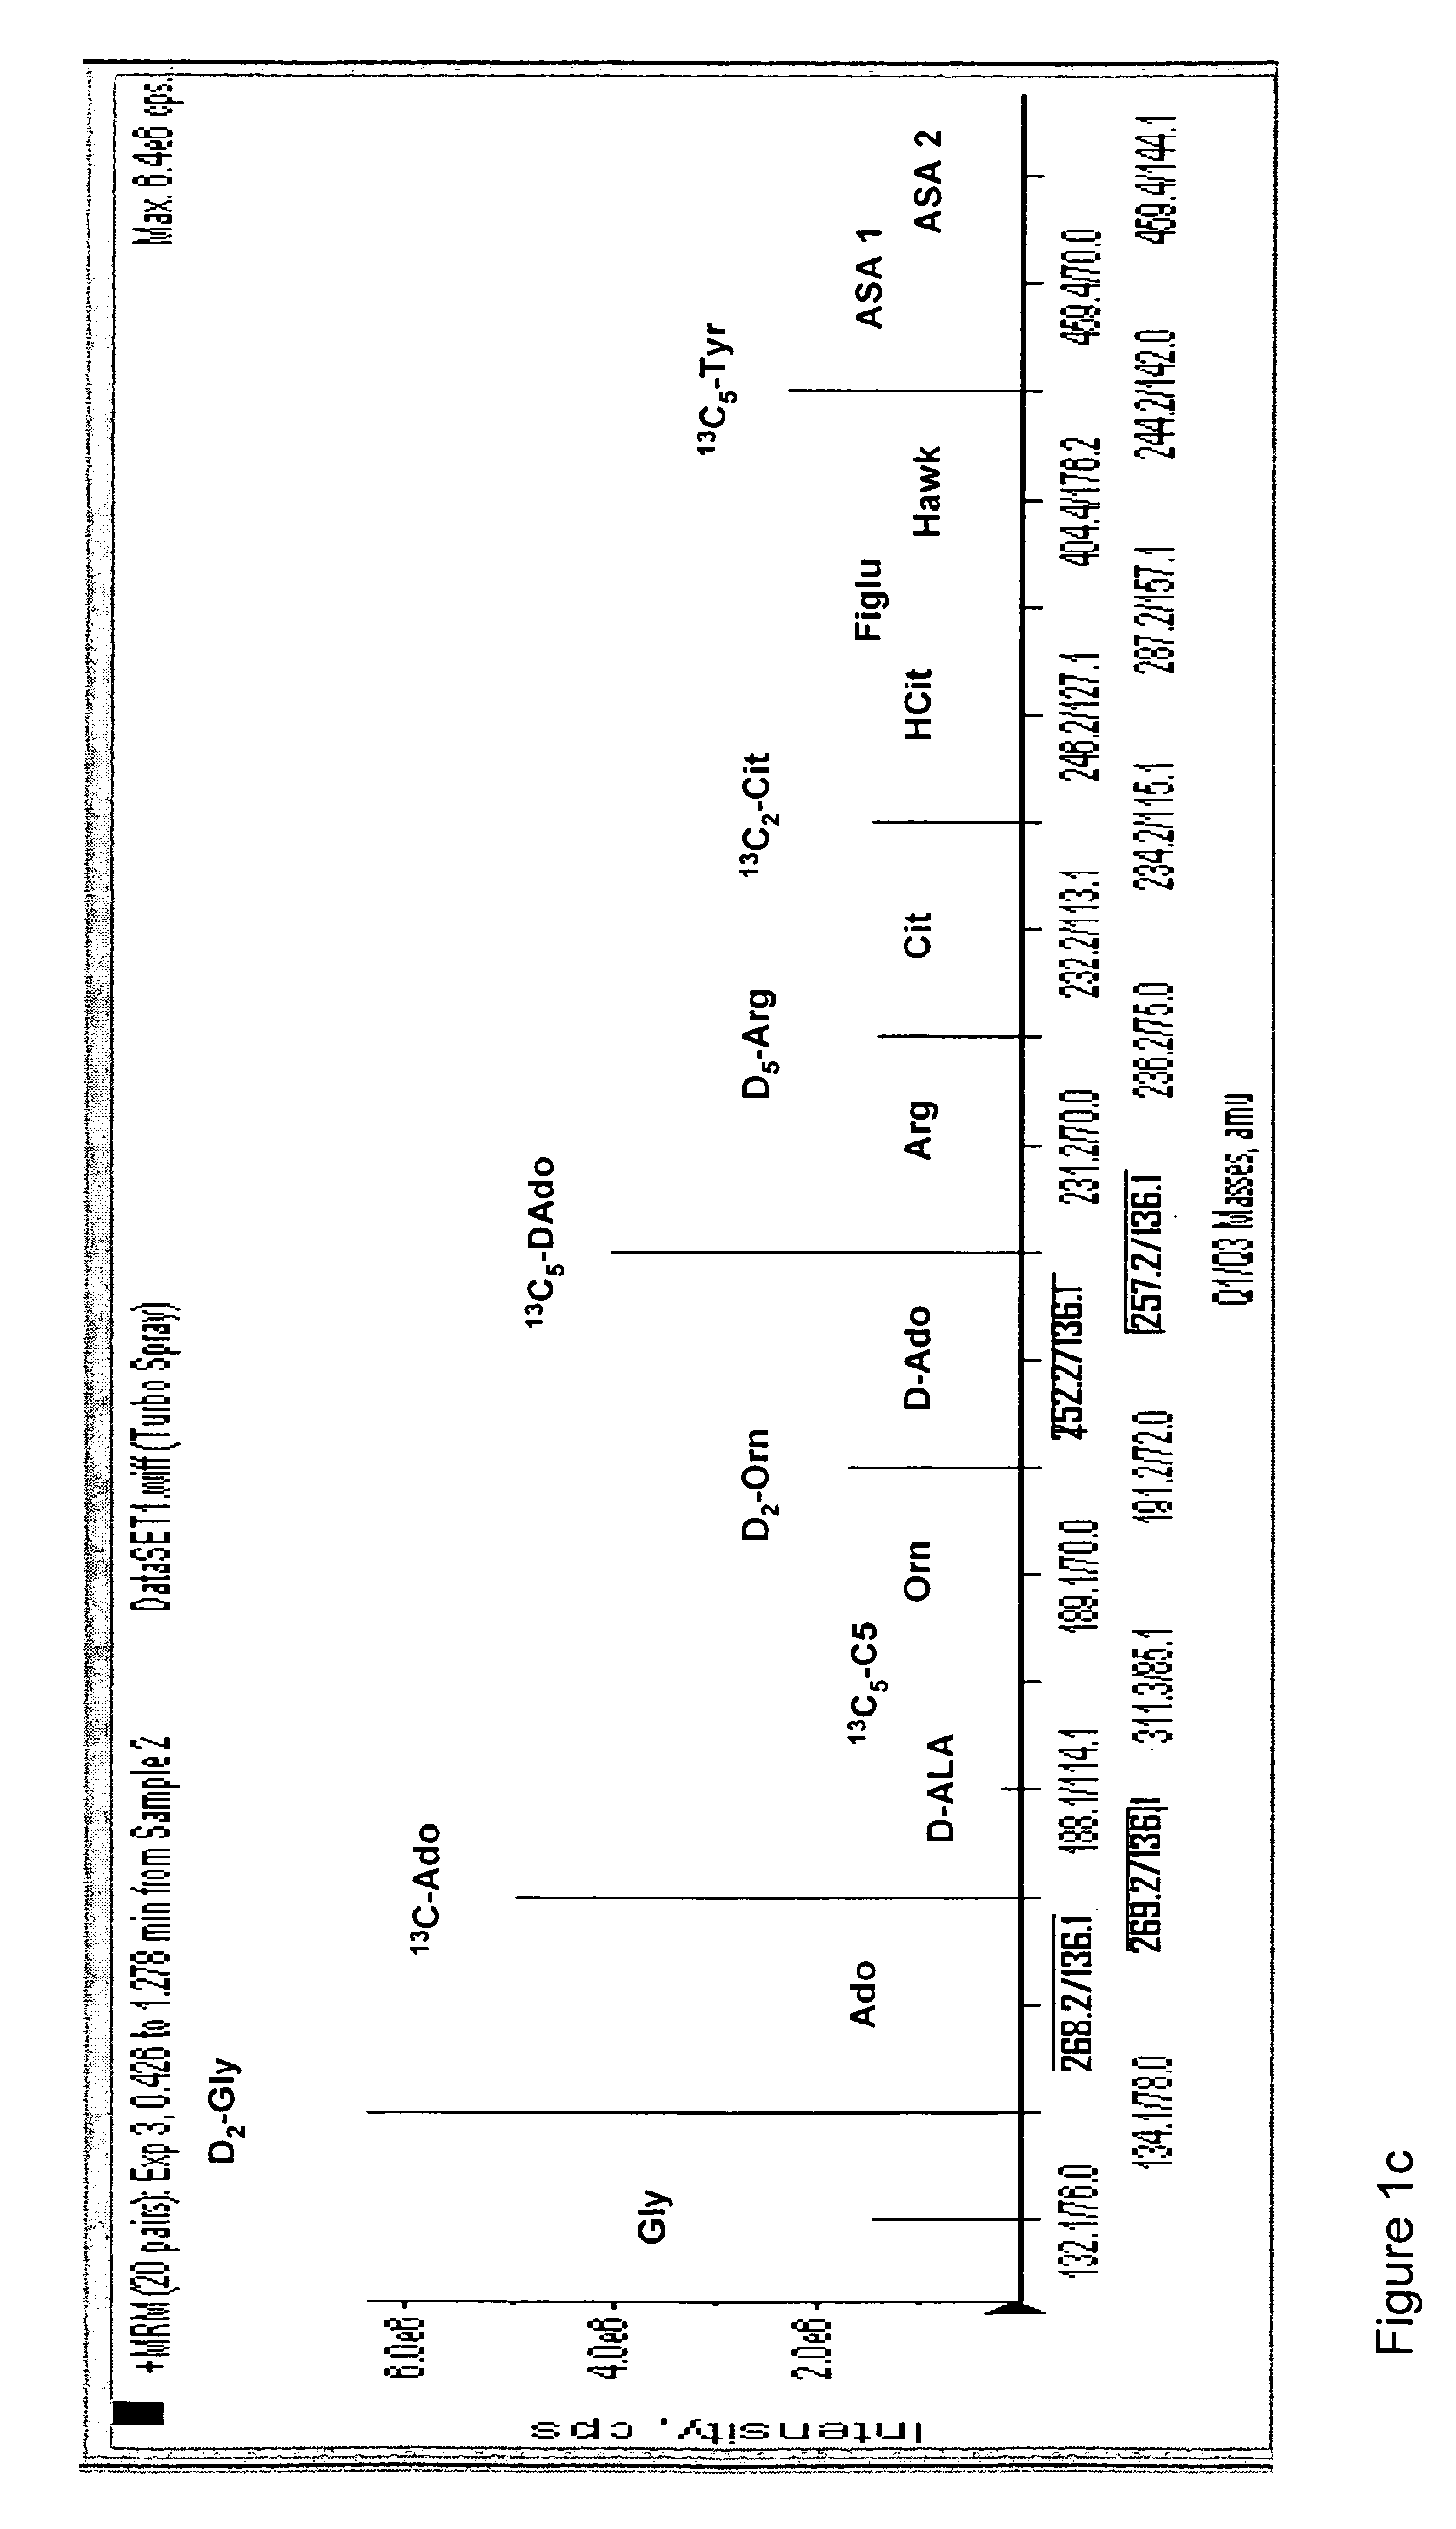 Method and kit for determining metabolites on dried blood spot samples